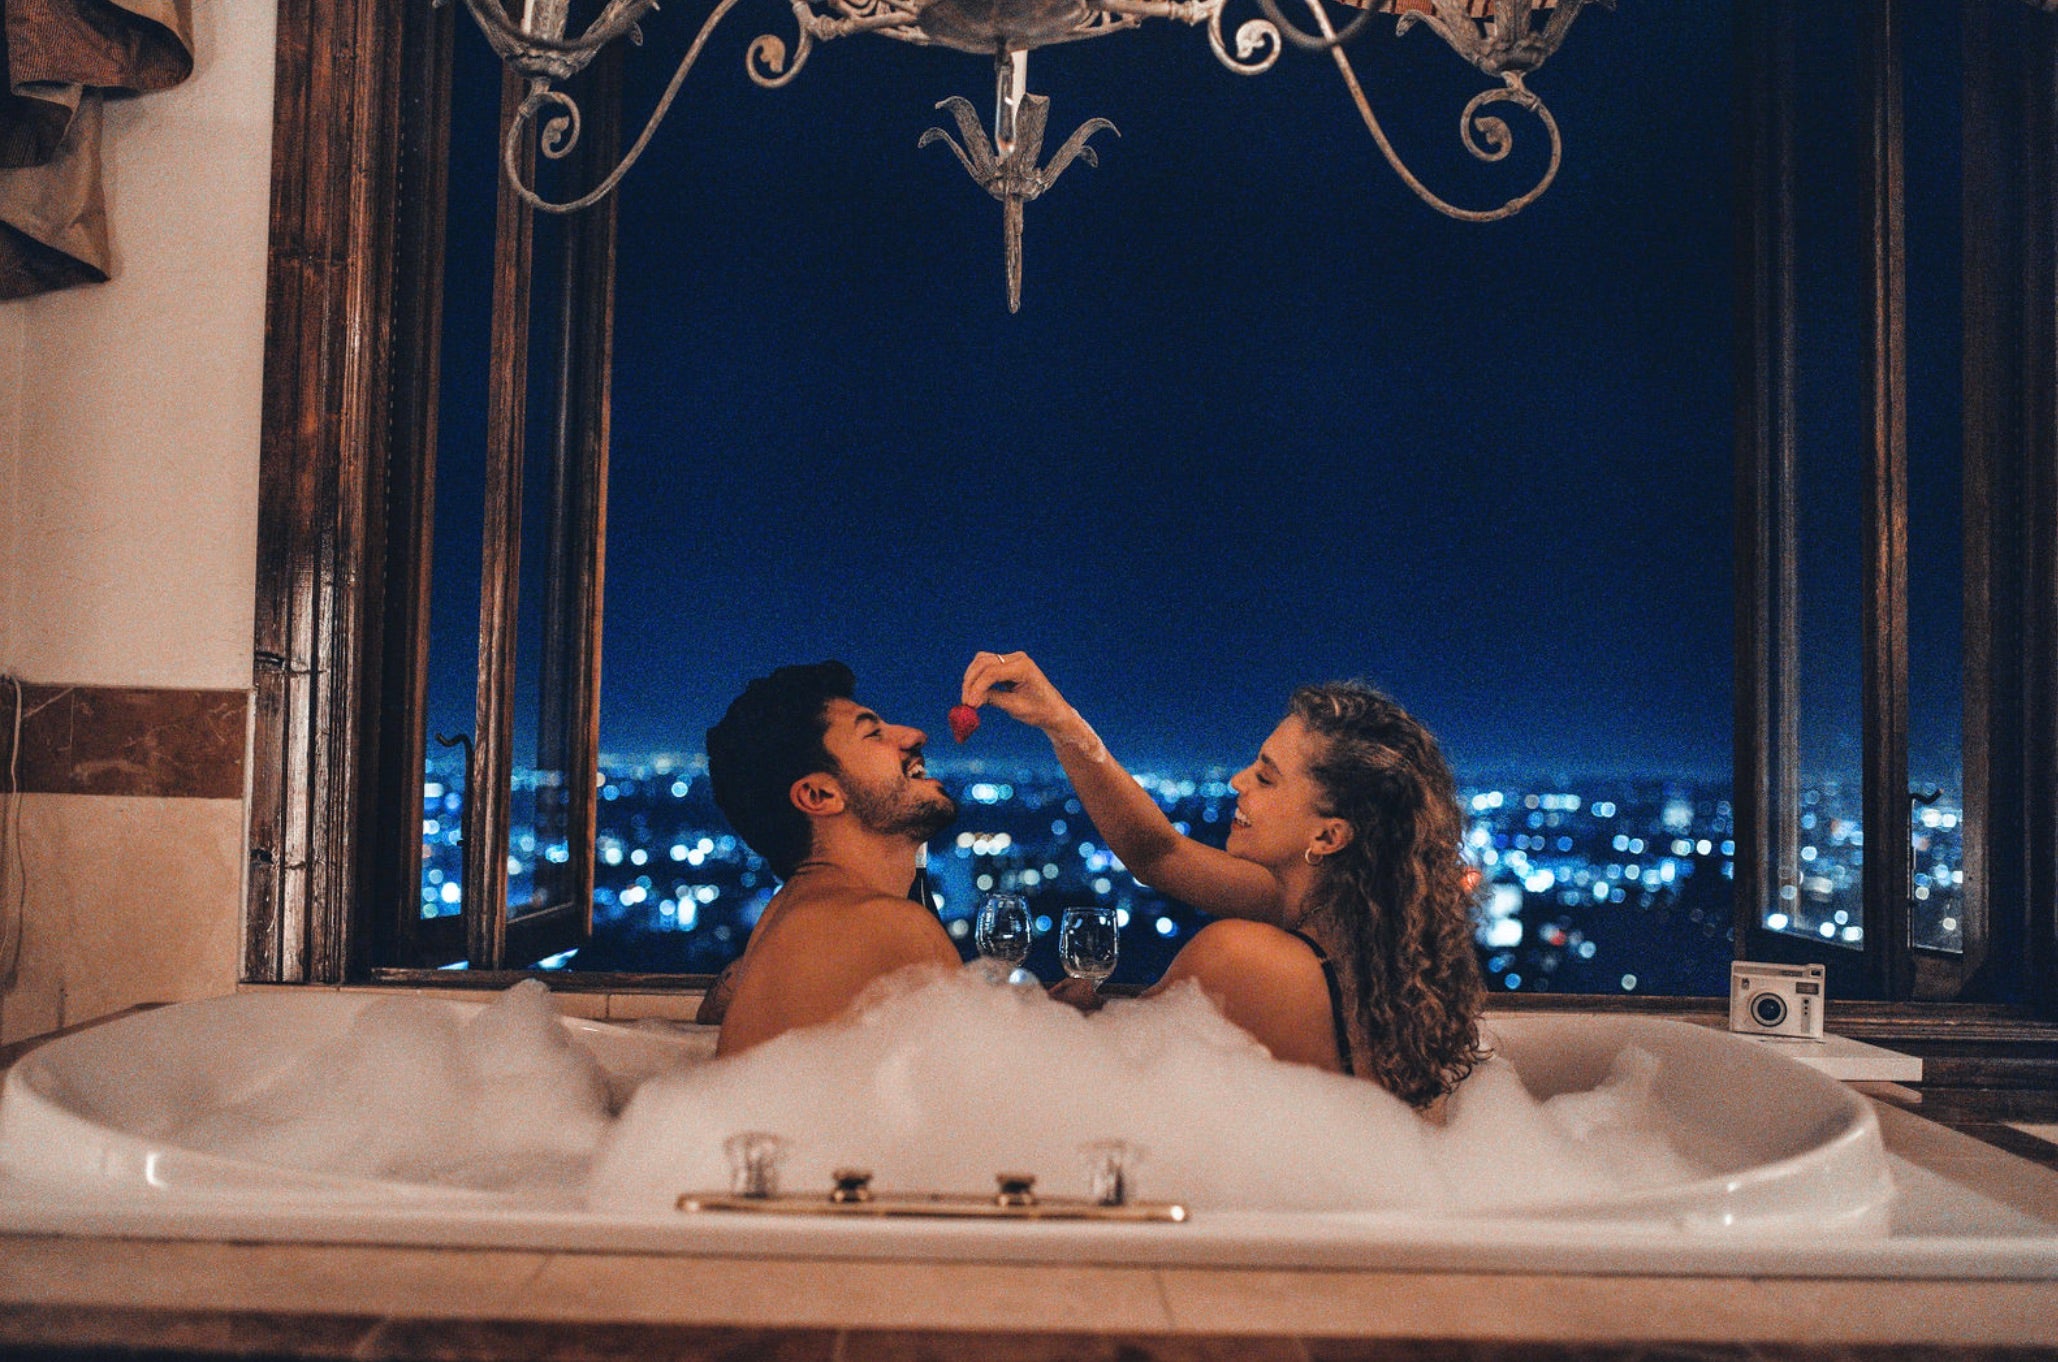 Girlfriend feeds her boyfriend a strawberry while in a bubble bath with a view of the city lights in front of them